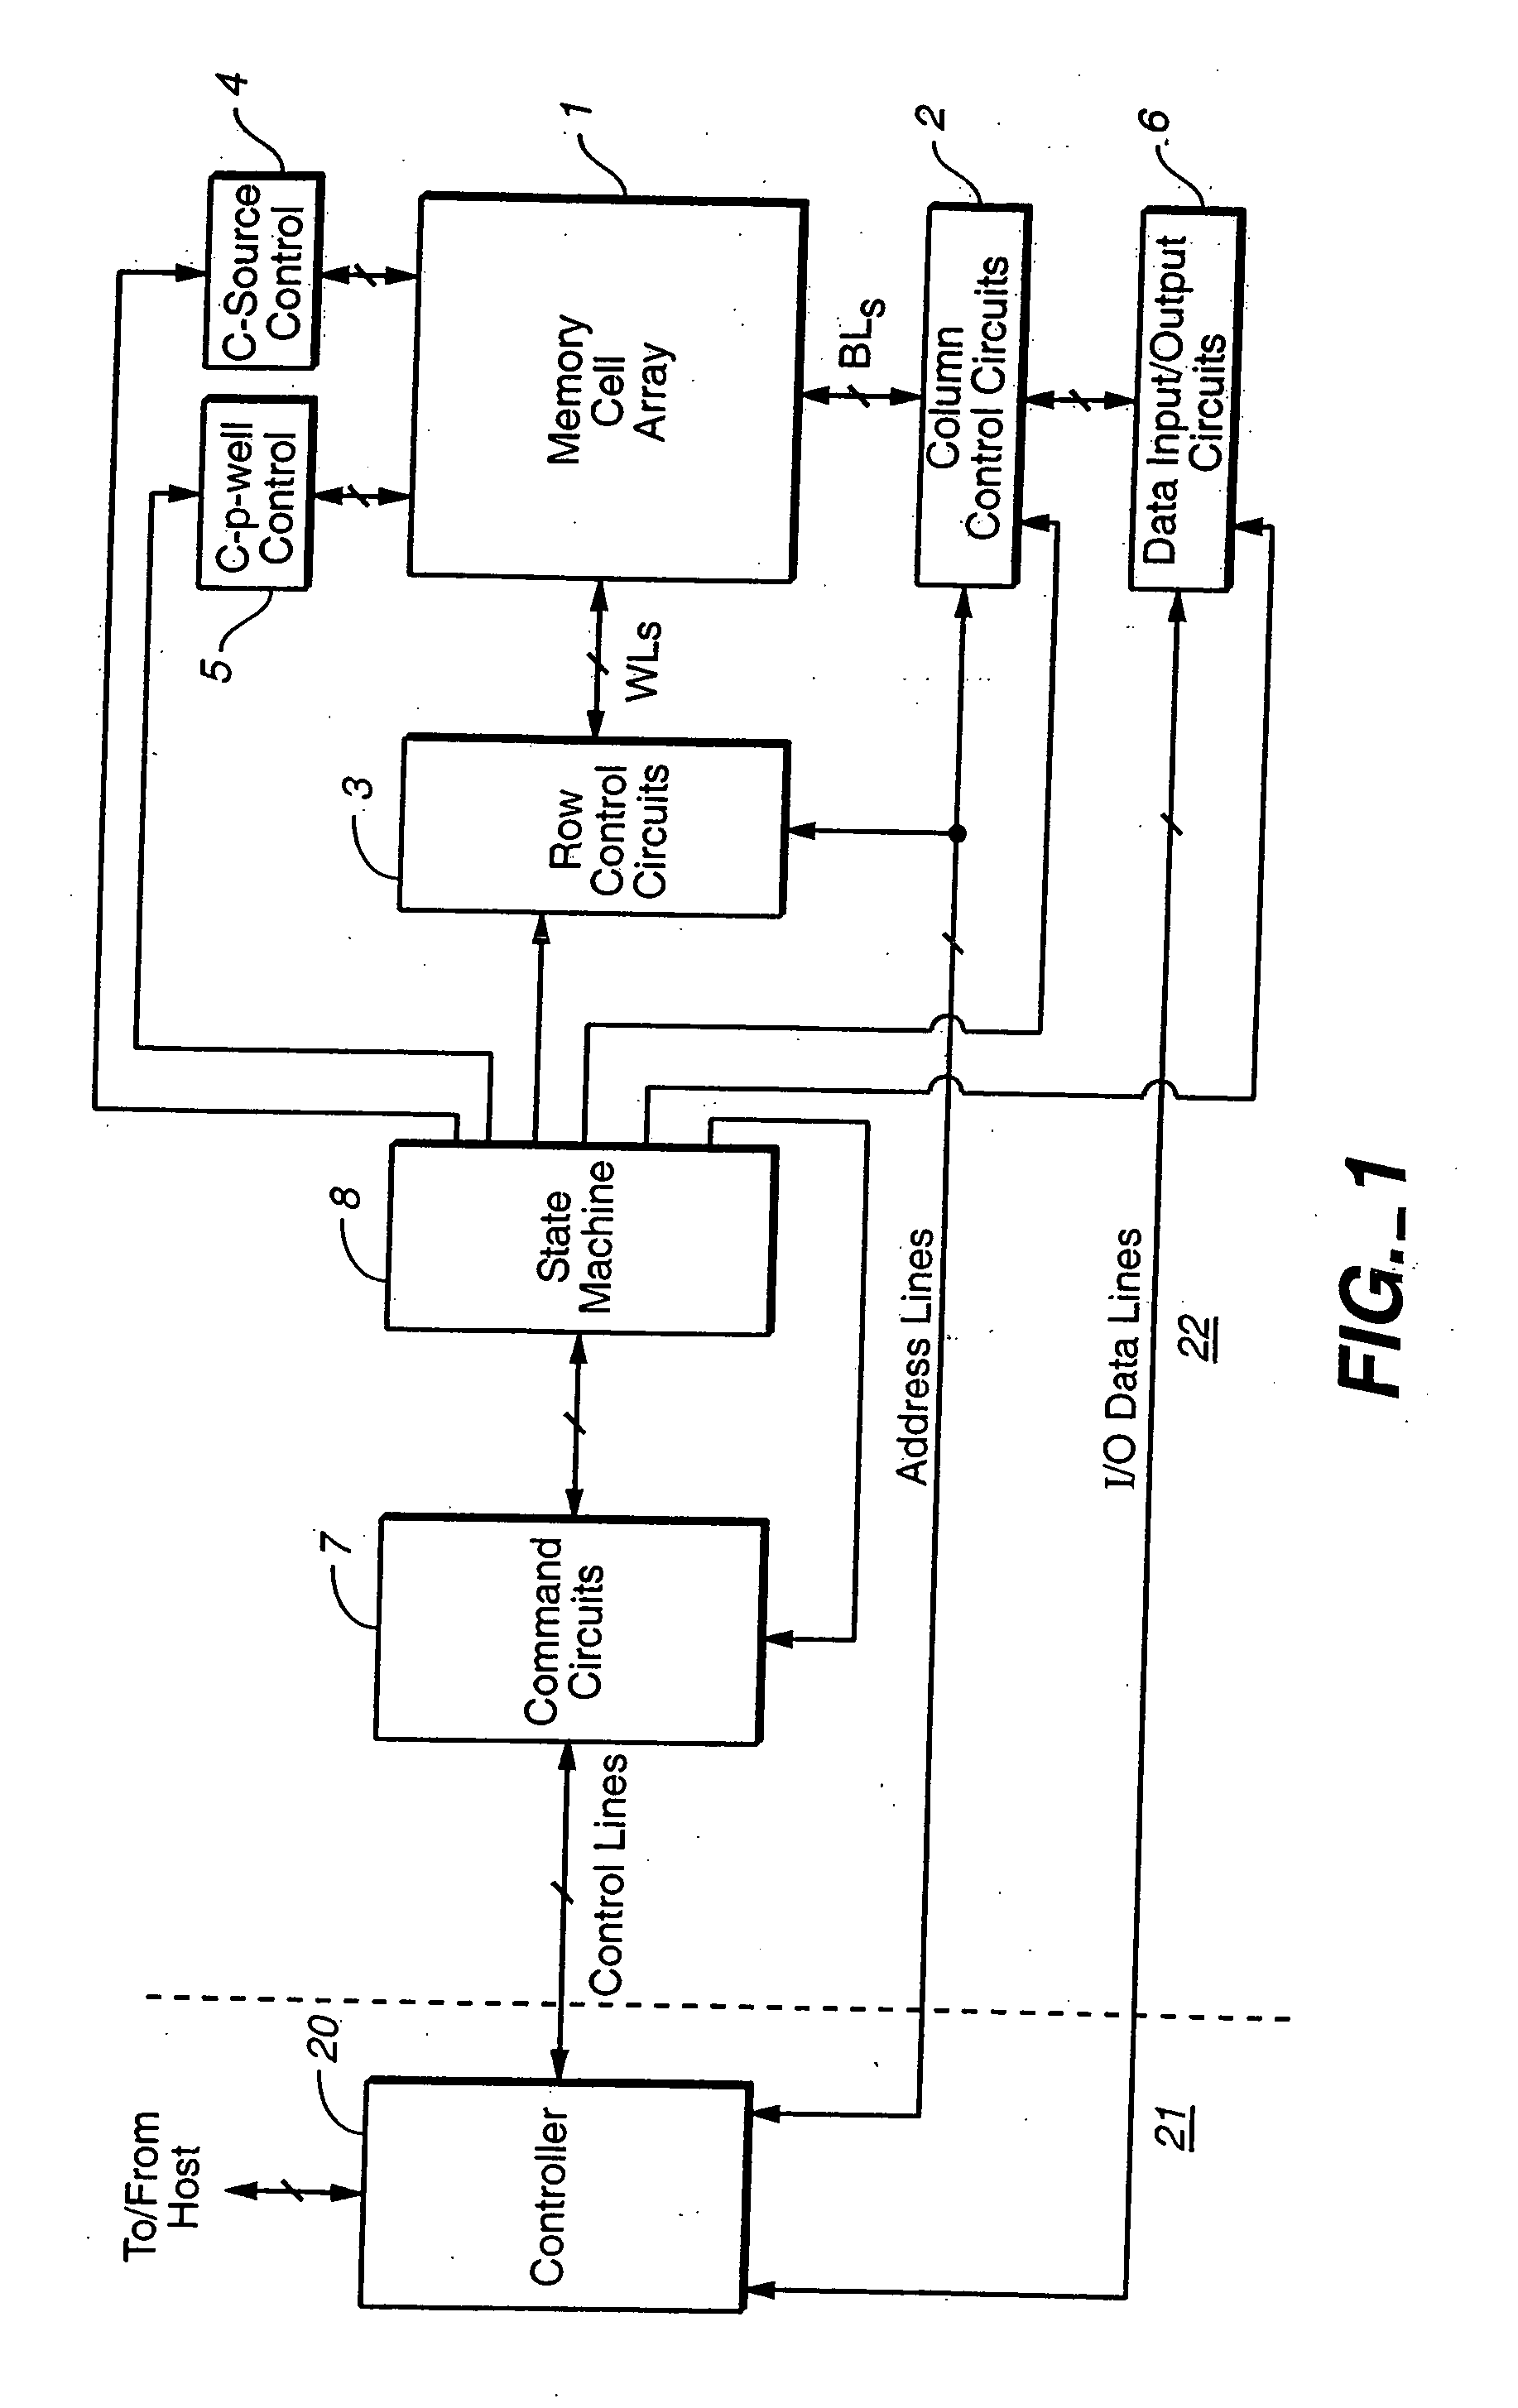 Operating techniques for reducing effects of coupling between storage elements of a non-volatile memory operated in multiple data states